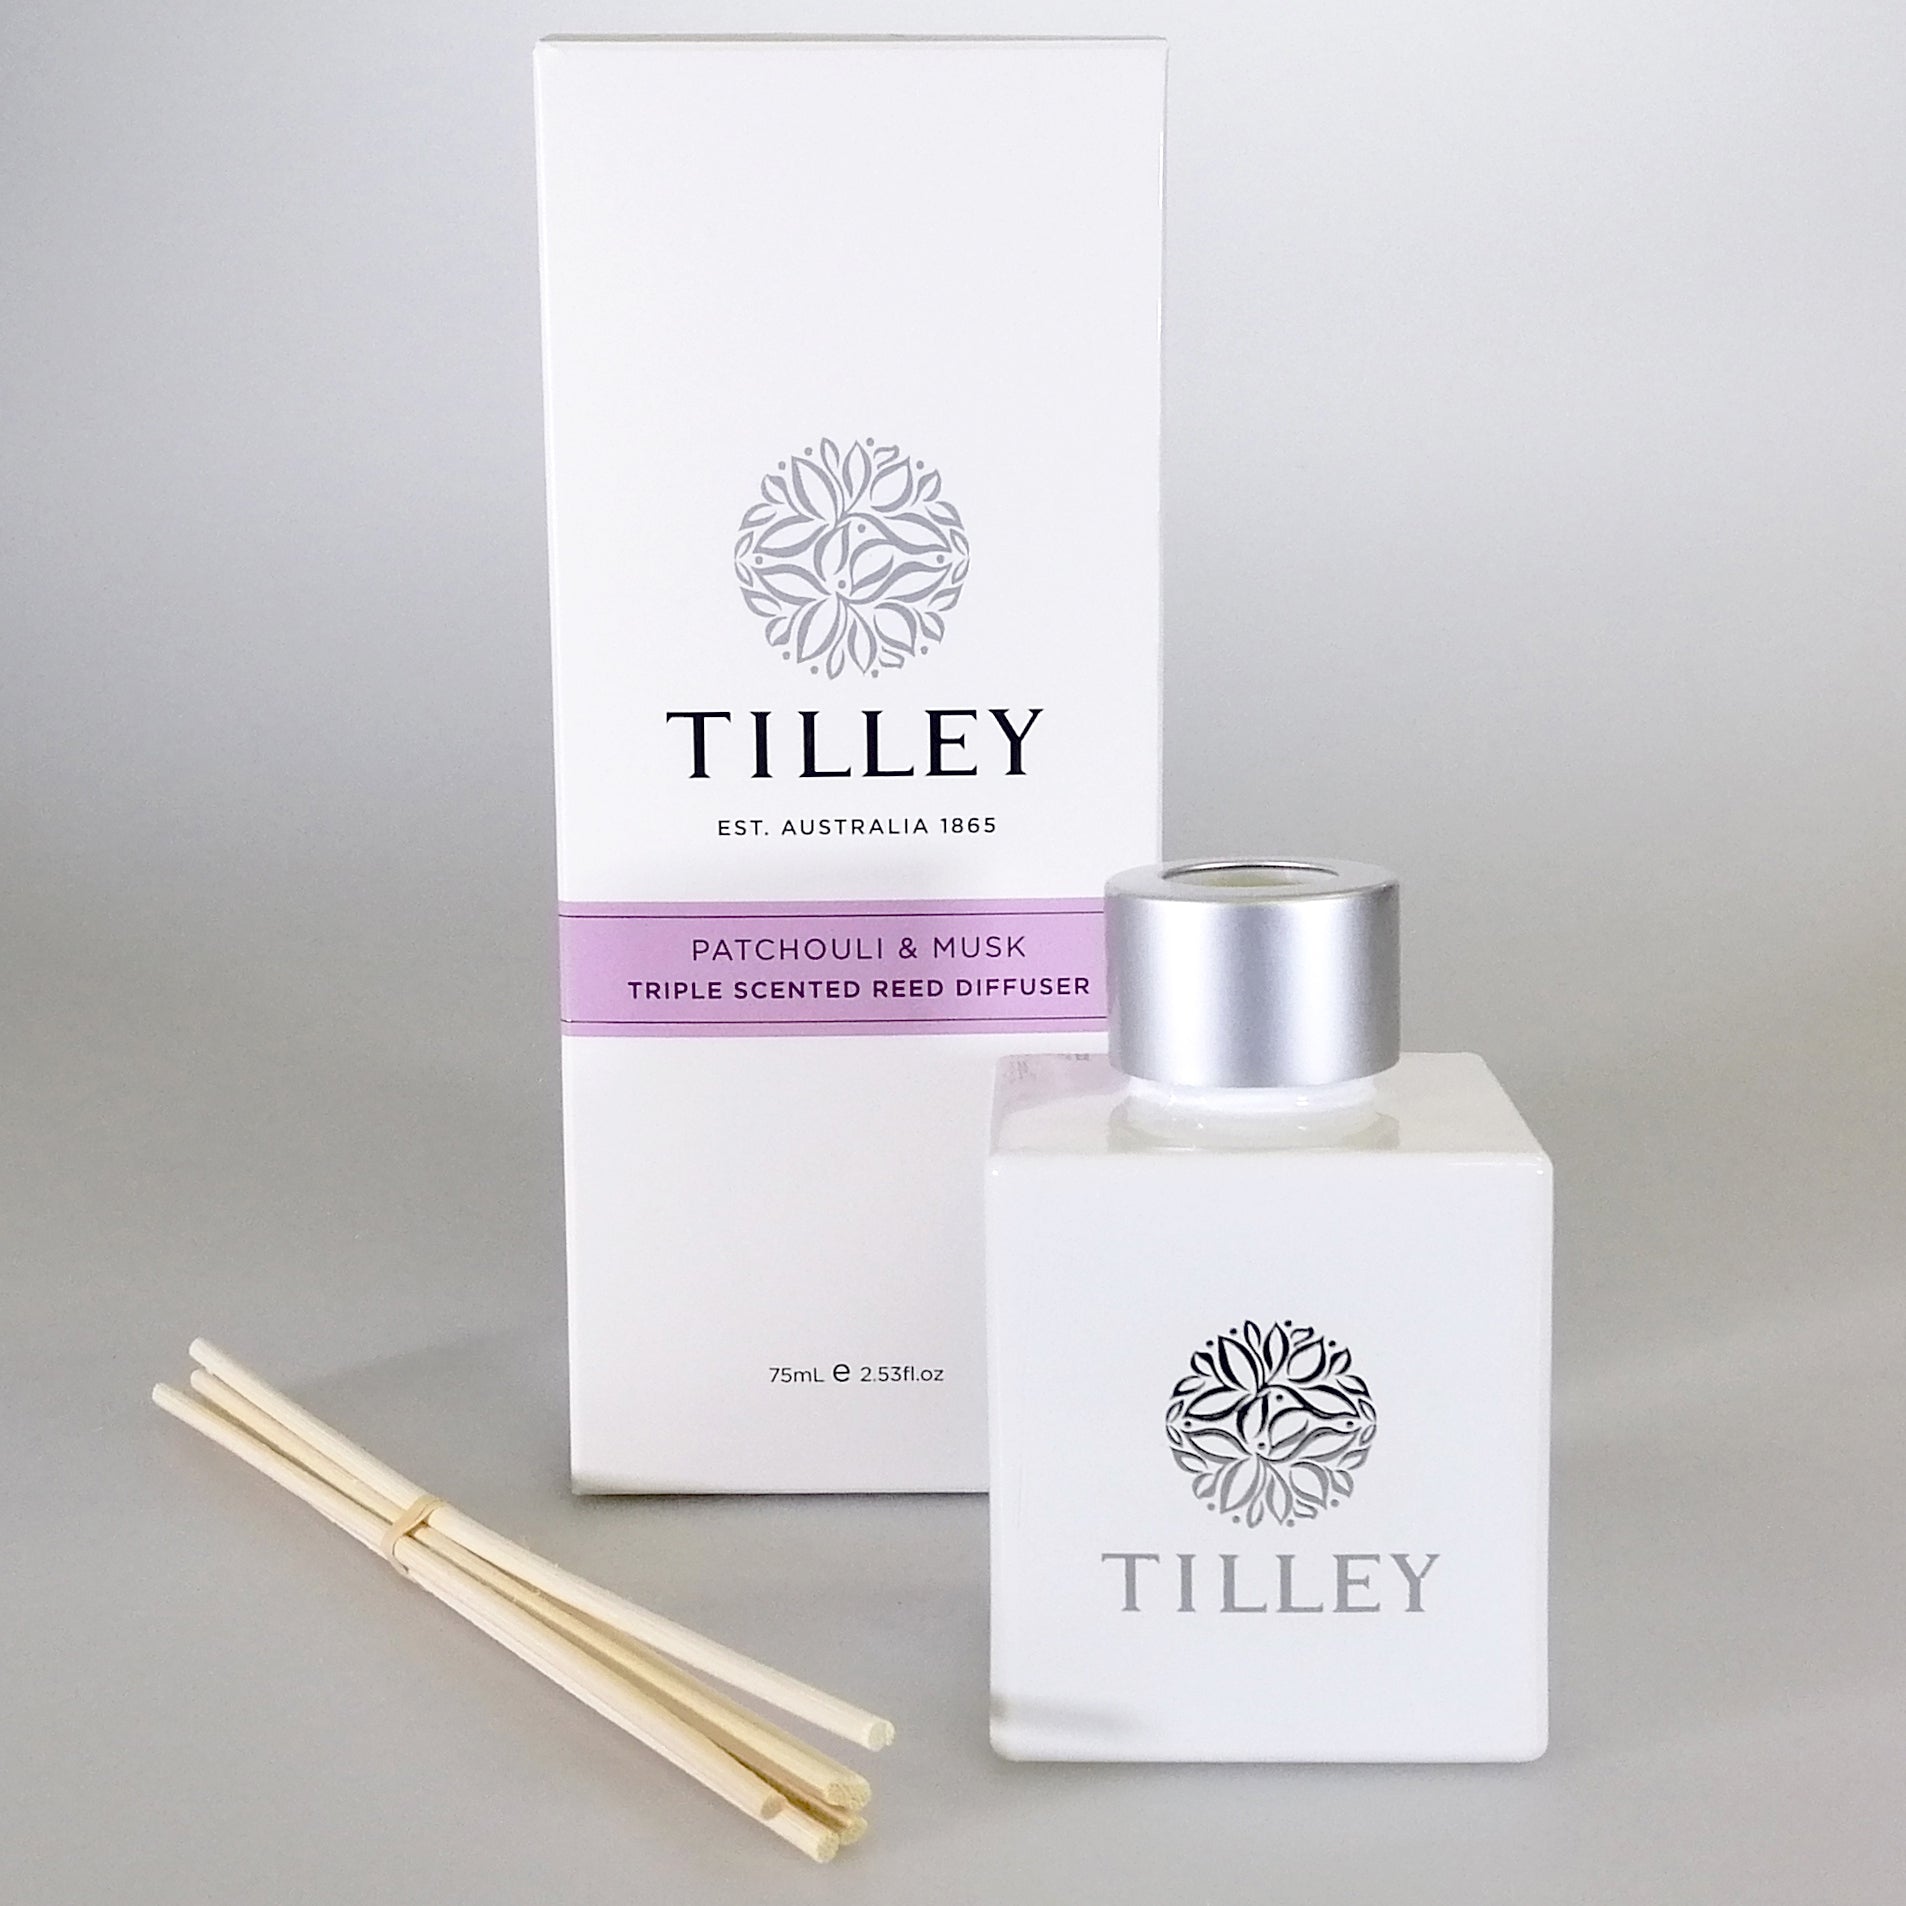 Tilley Reed Diffuser - Patchouli & Musk - 75ml